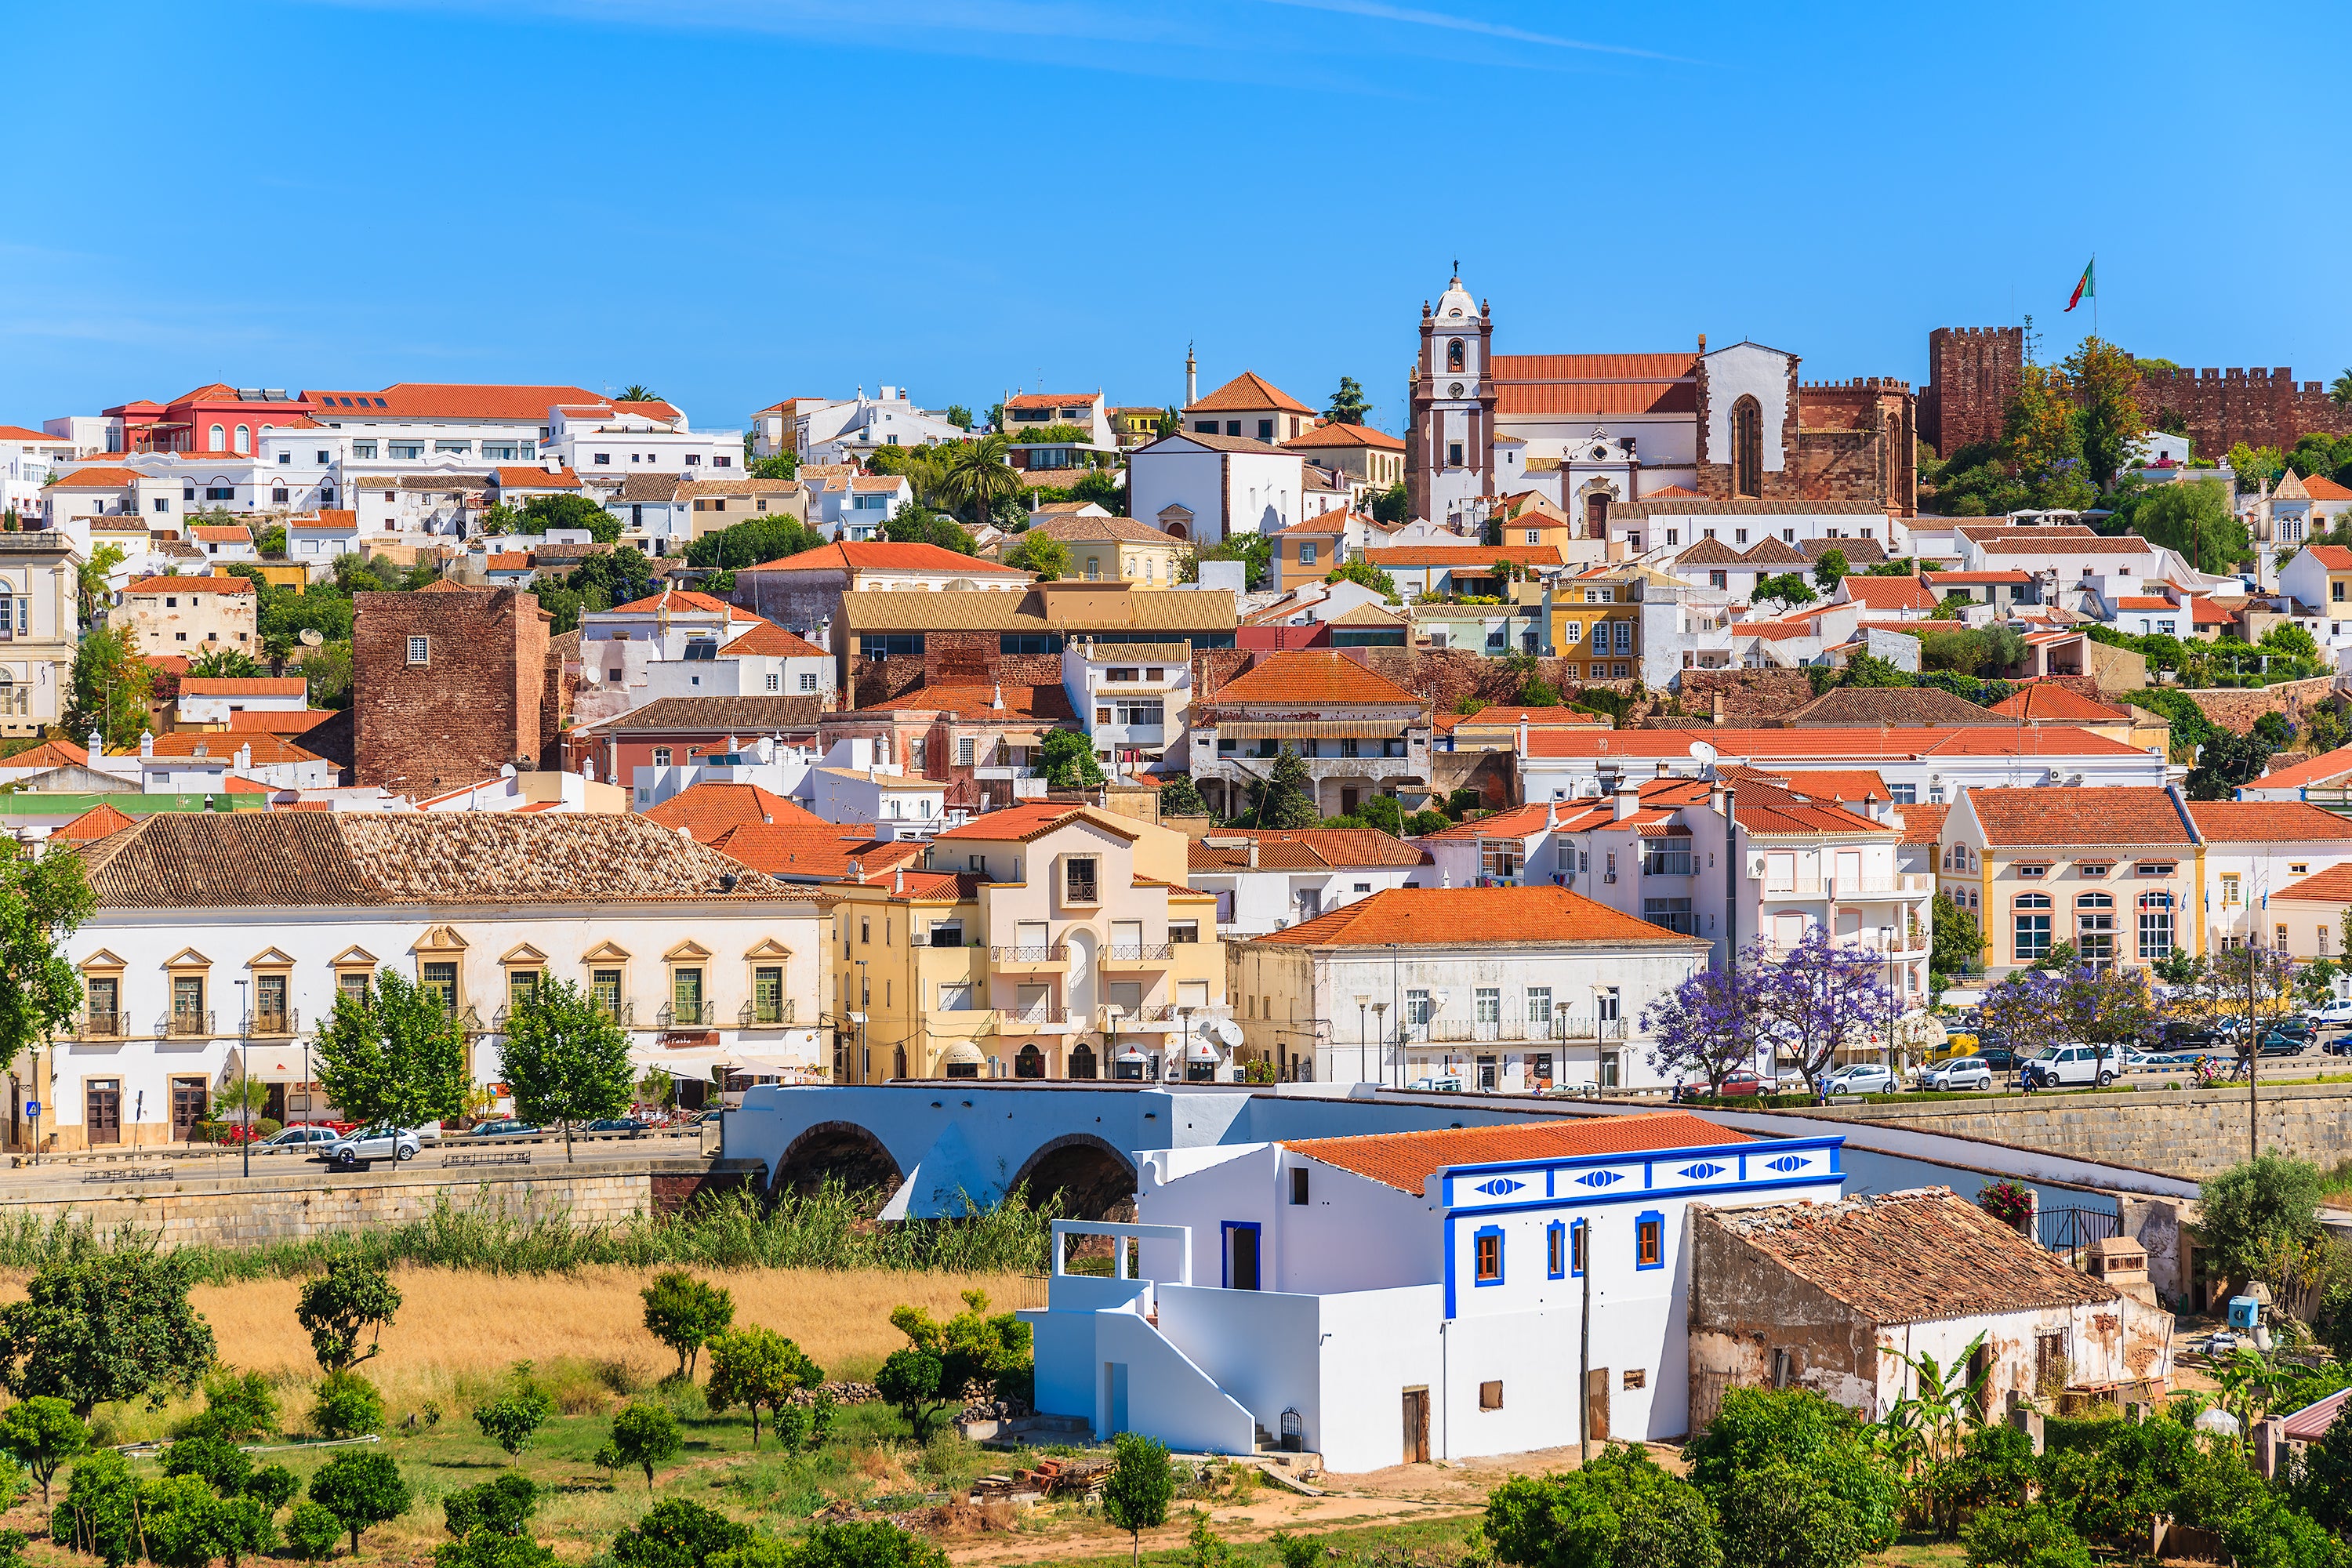 Aerial view of Silves in Southern Portugal - one of the many towns which ran on sustainable energy for 6 days